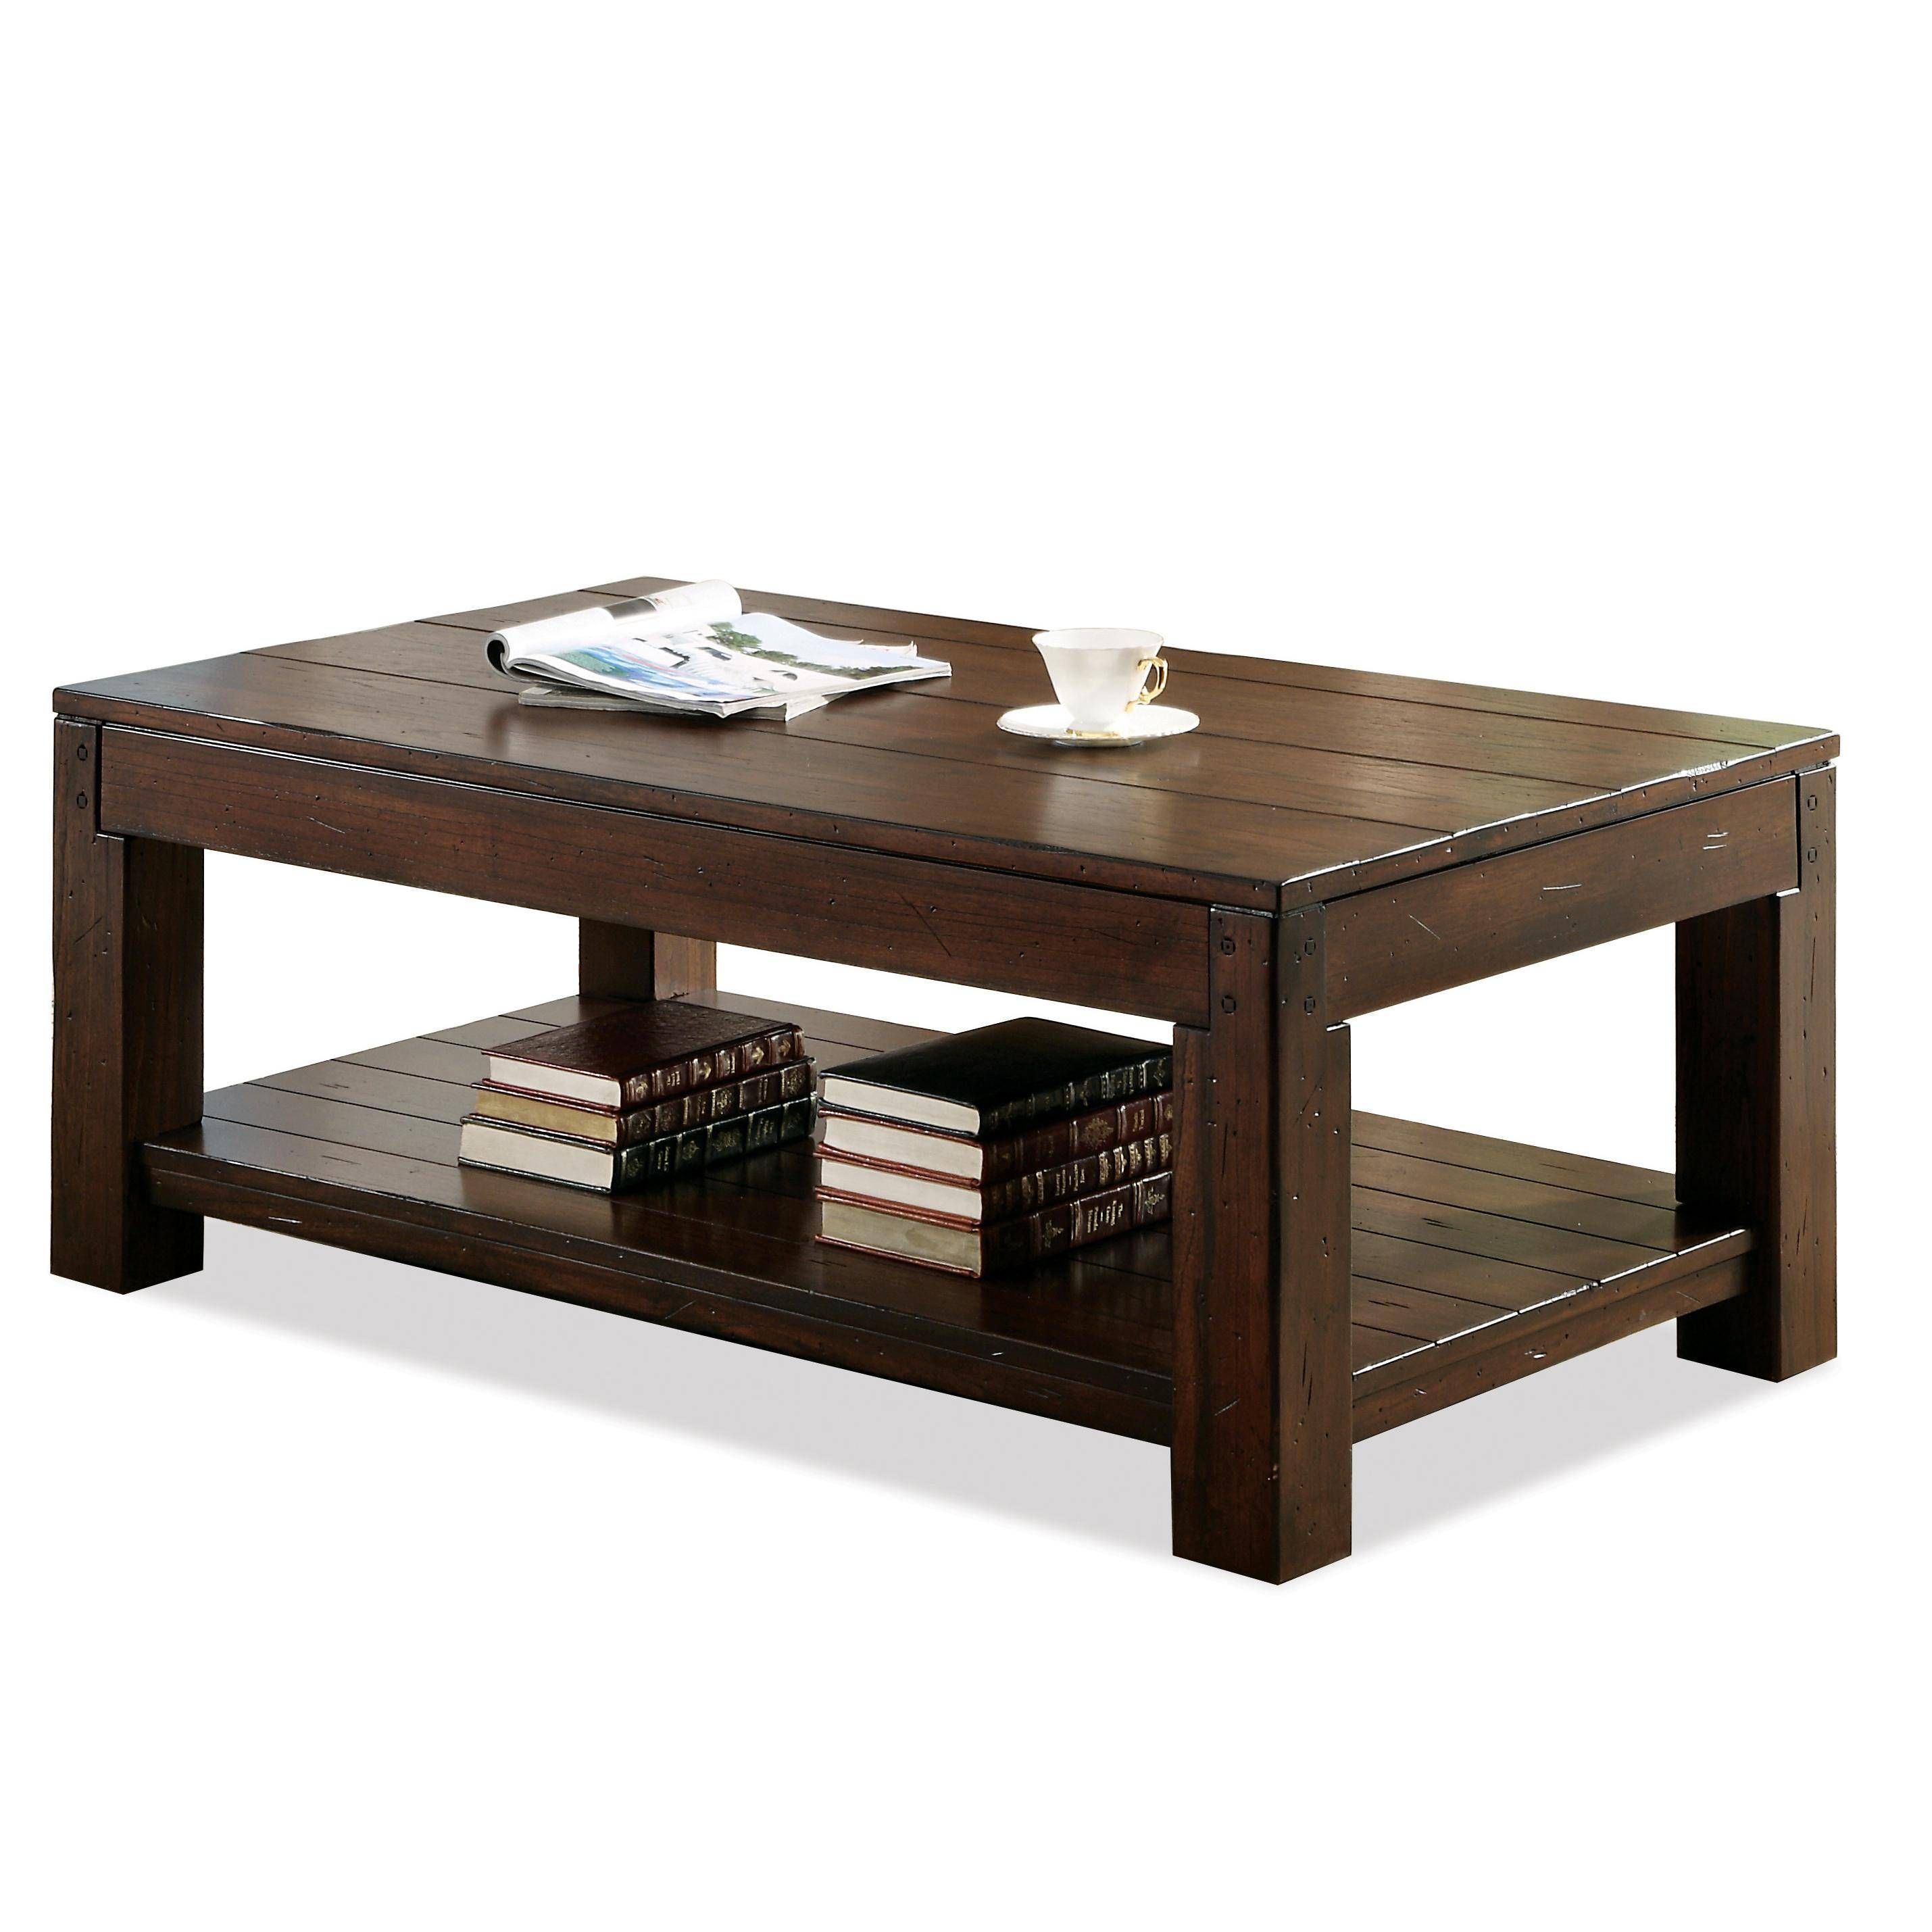 Rectangular Coffee Table With Fixed Lower Shelf And Block Legs In Low Rectangular Coffee Tables (View 15 of 30)